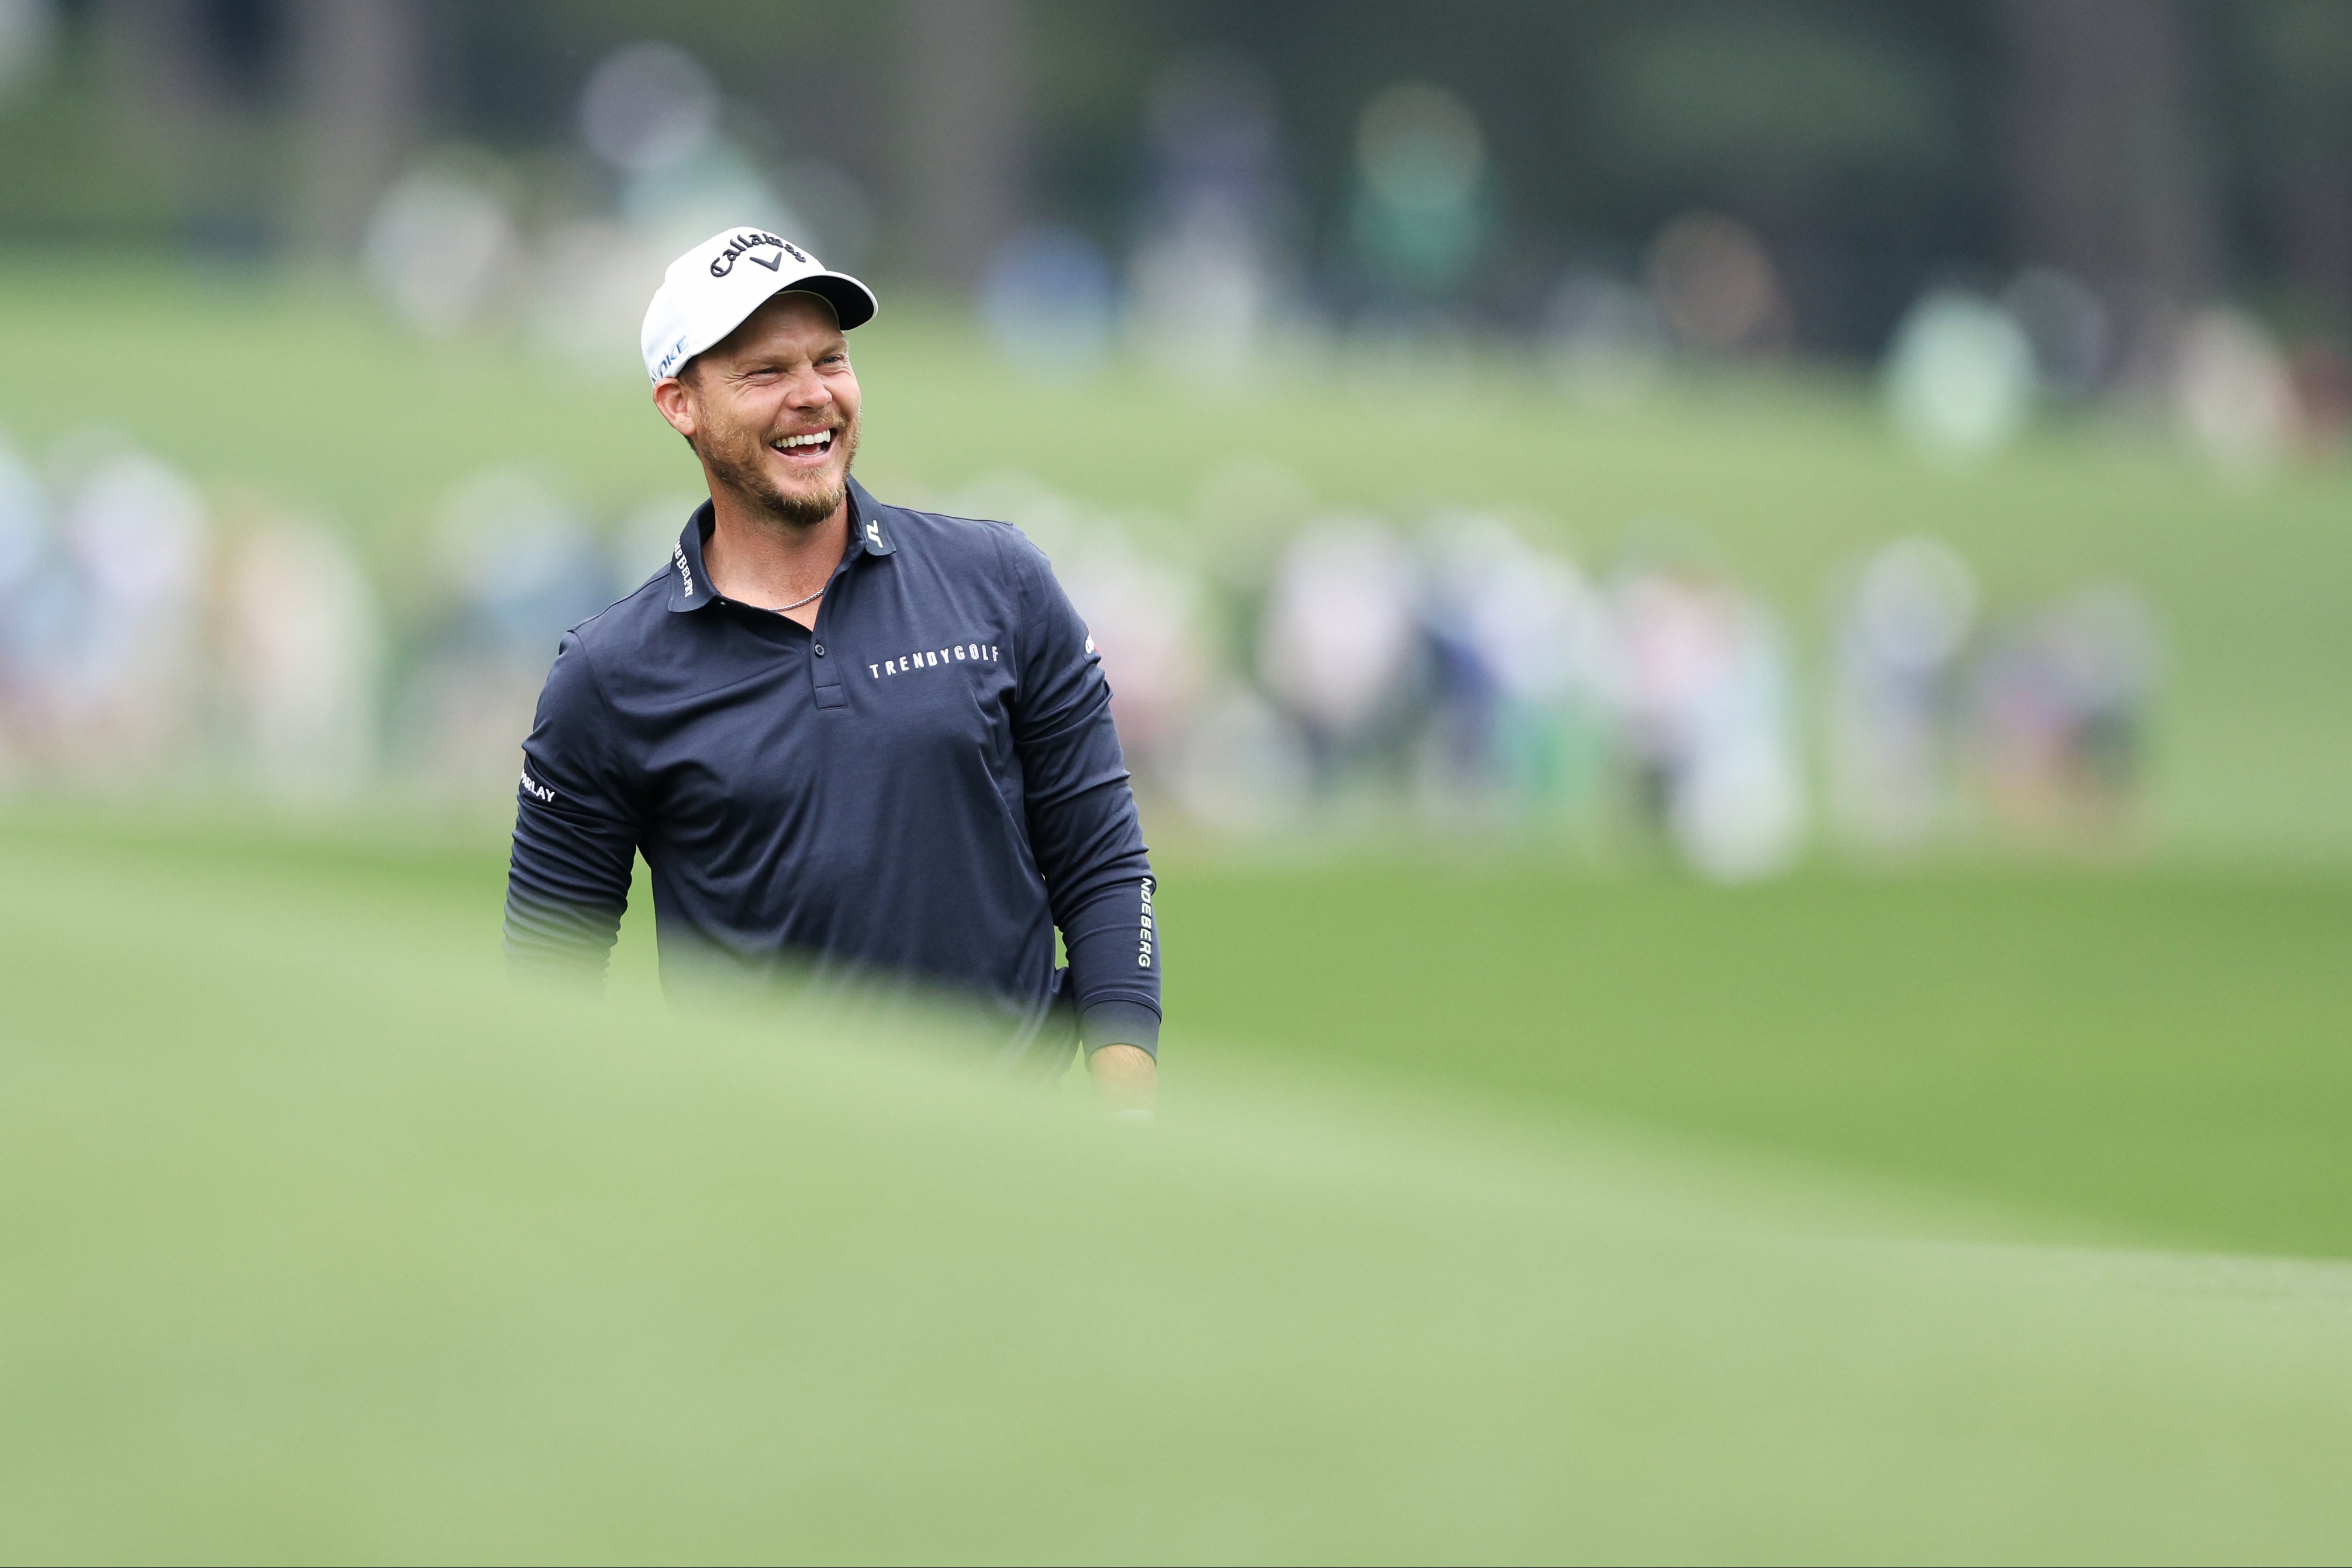 Danny Willett impressed on his return to action